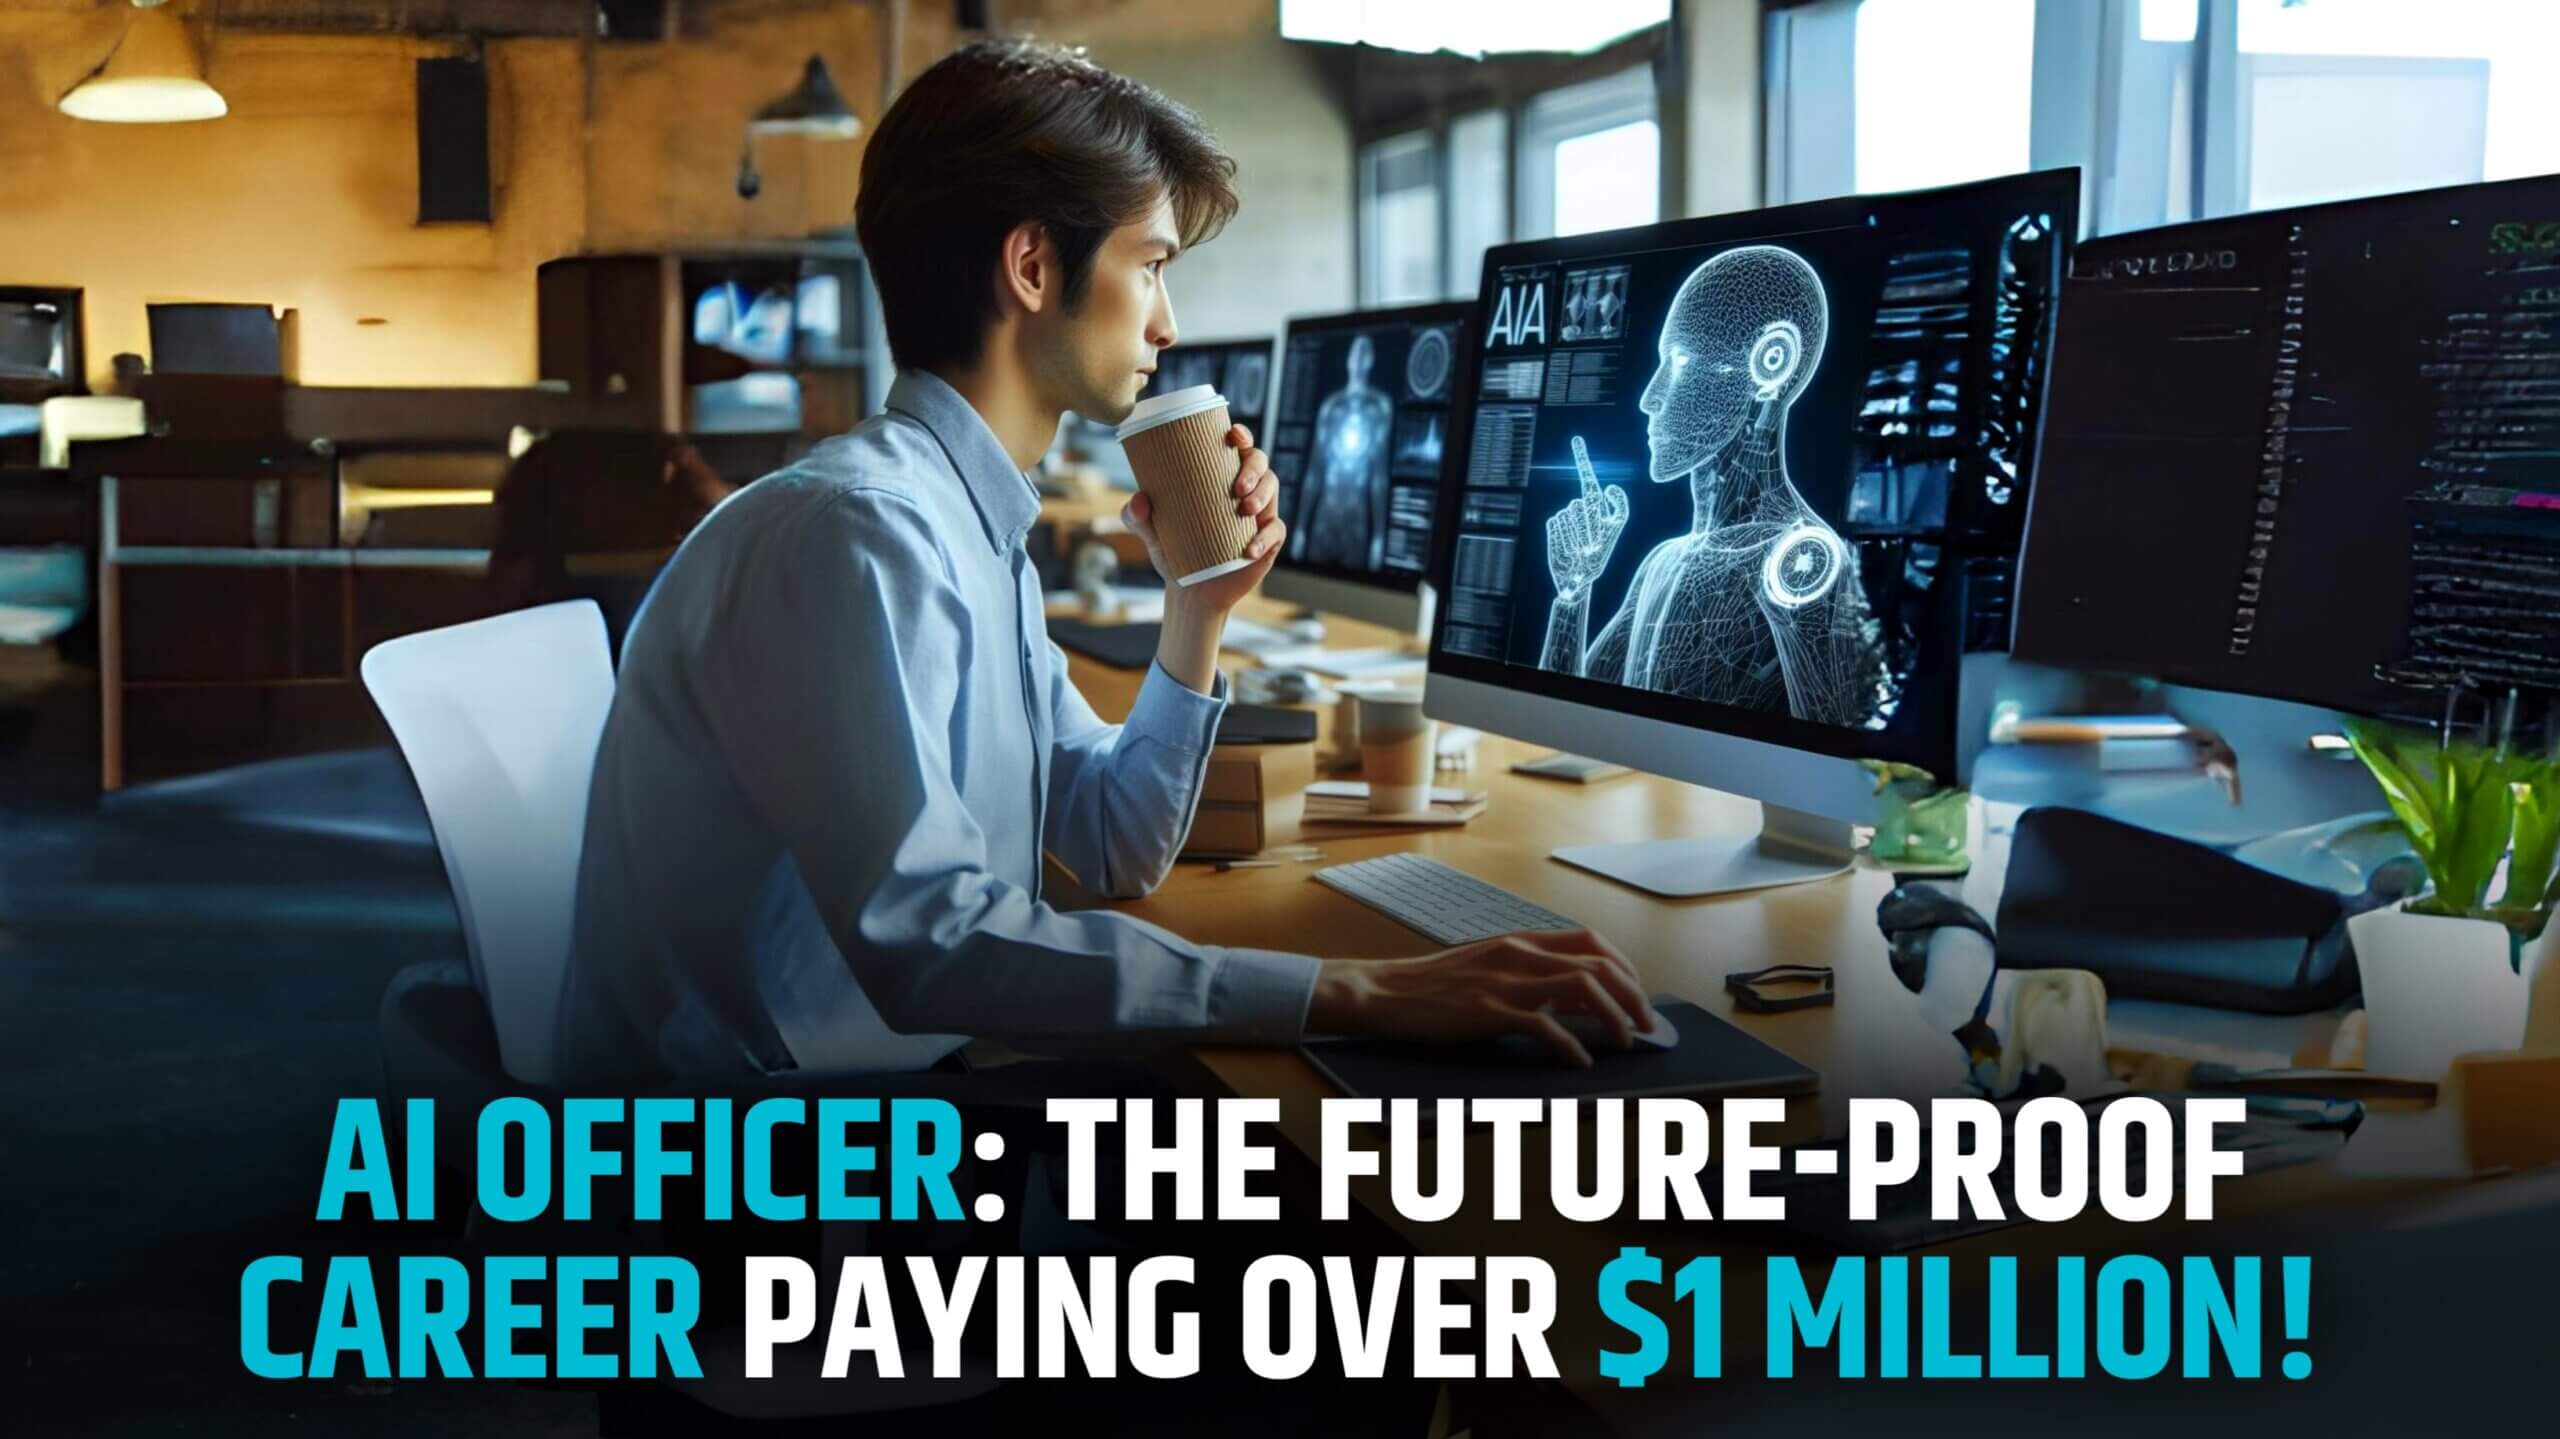 Become An AI Officer: The Future-Proof Career Paying Over $1 Million